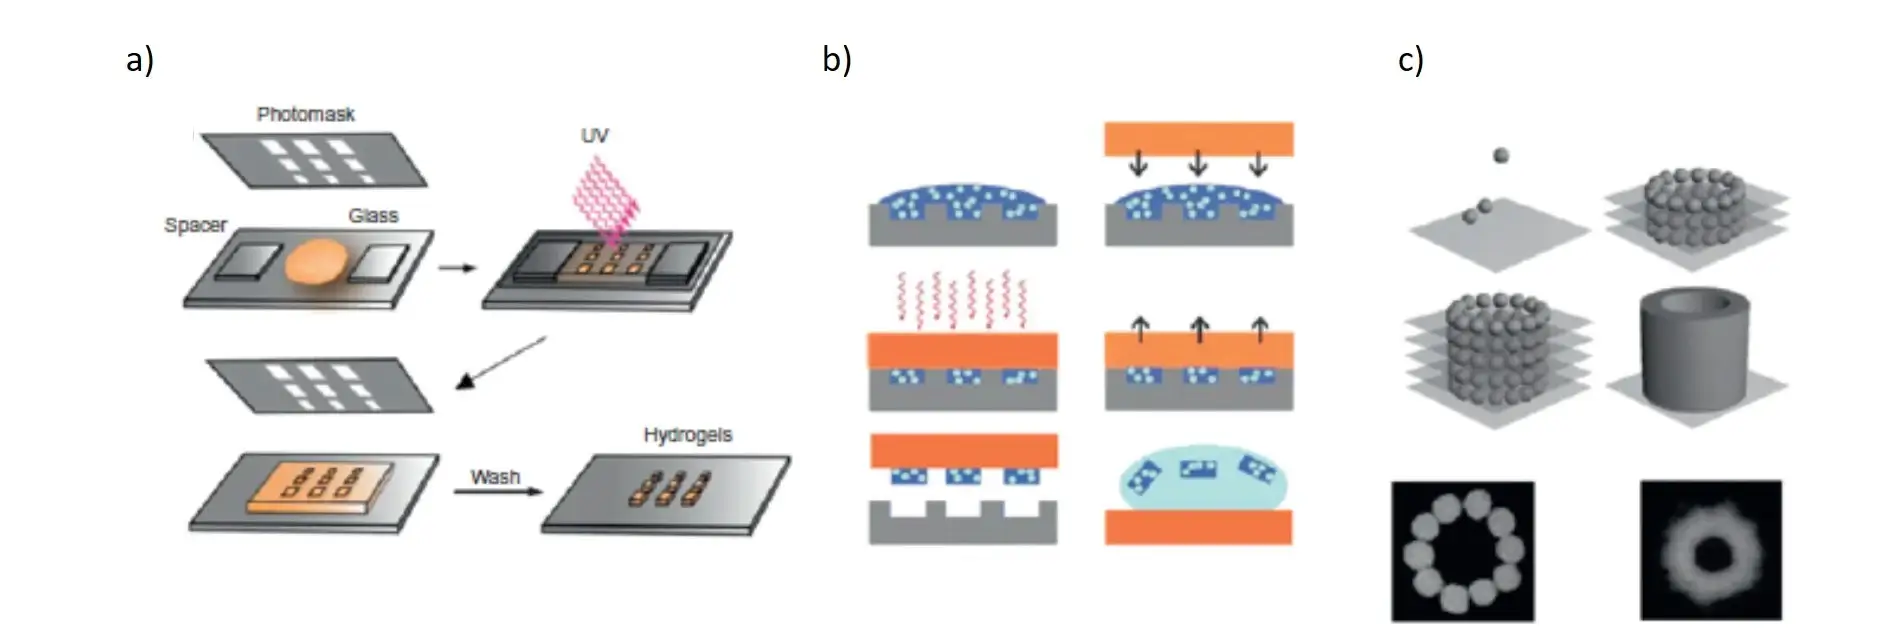 Microfabrication techniques for polymers in microfluidics: a review